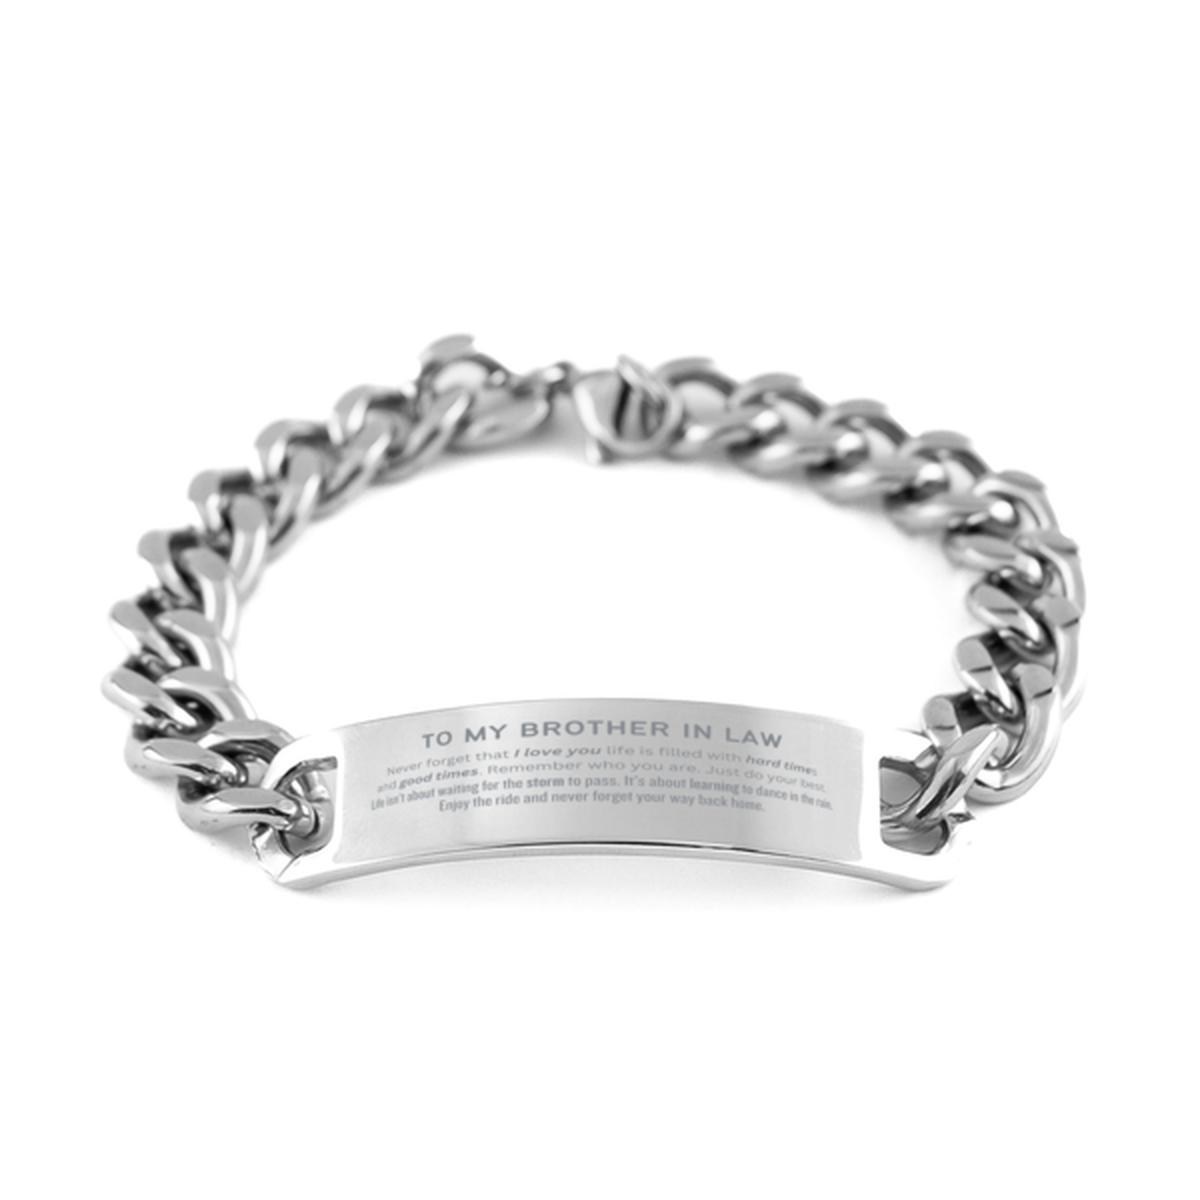 Christmas Brother In Law Cuban Chain Stainless Steel Bracelet Gifts, To My Brother In Law Birthday Thank You Gifts For Brother In Law, Graduation Unique Gifts For Brother In Law To My Brother In Law Never forget that I love you life is filled with hard ti